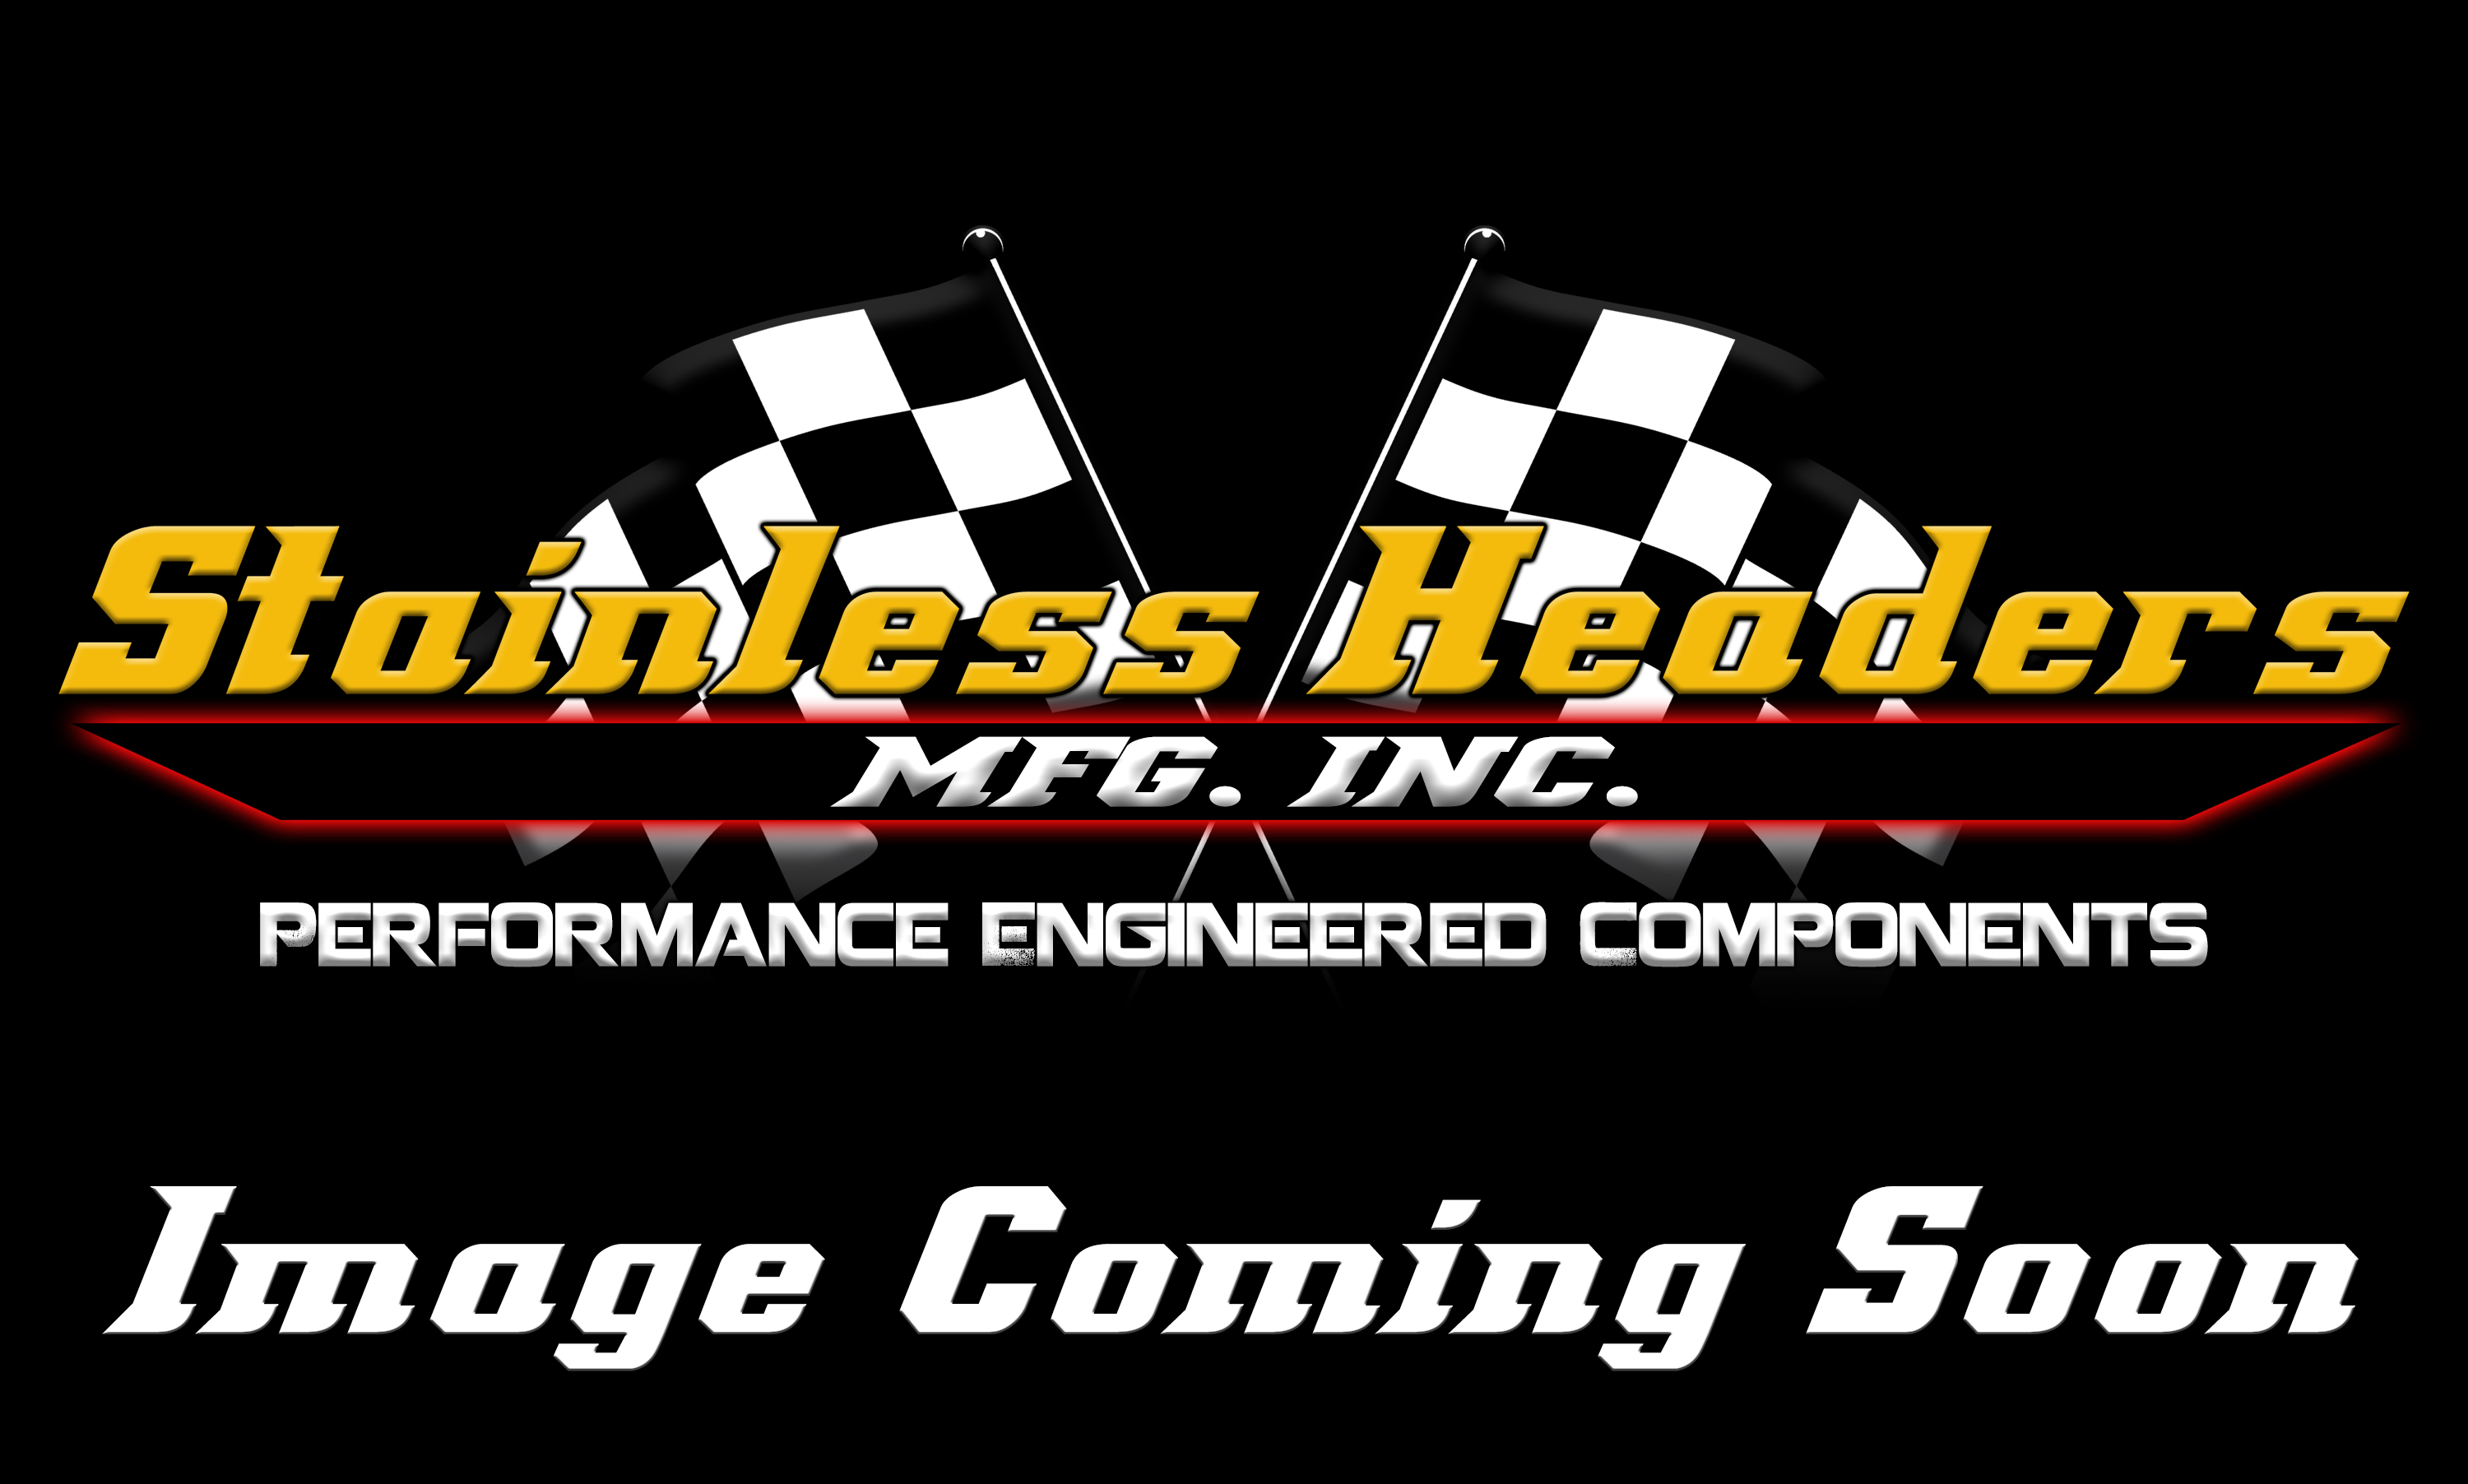 Stainless Headers - 2 1/4" Primary 4 into 1 Performance Merge Collector-16ga 321ss